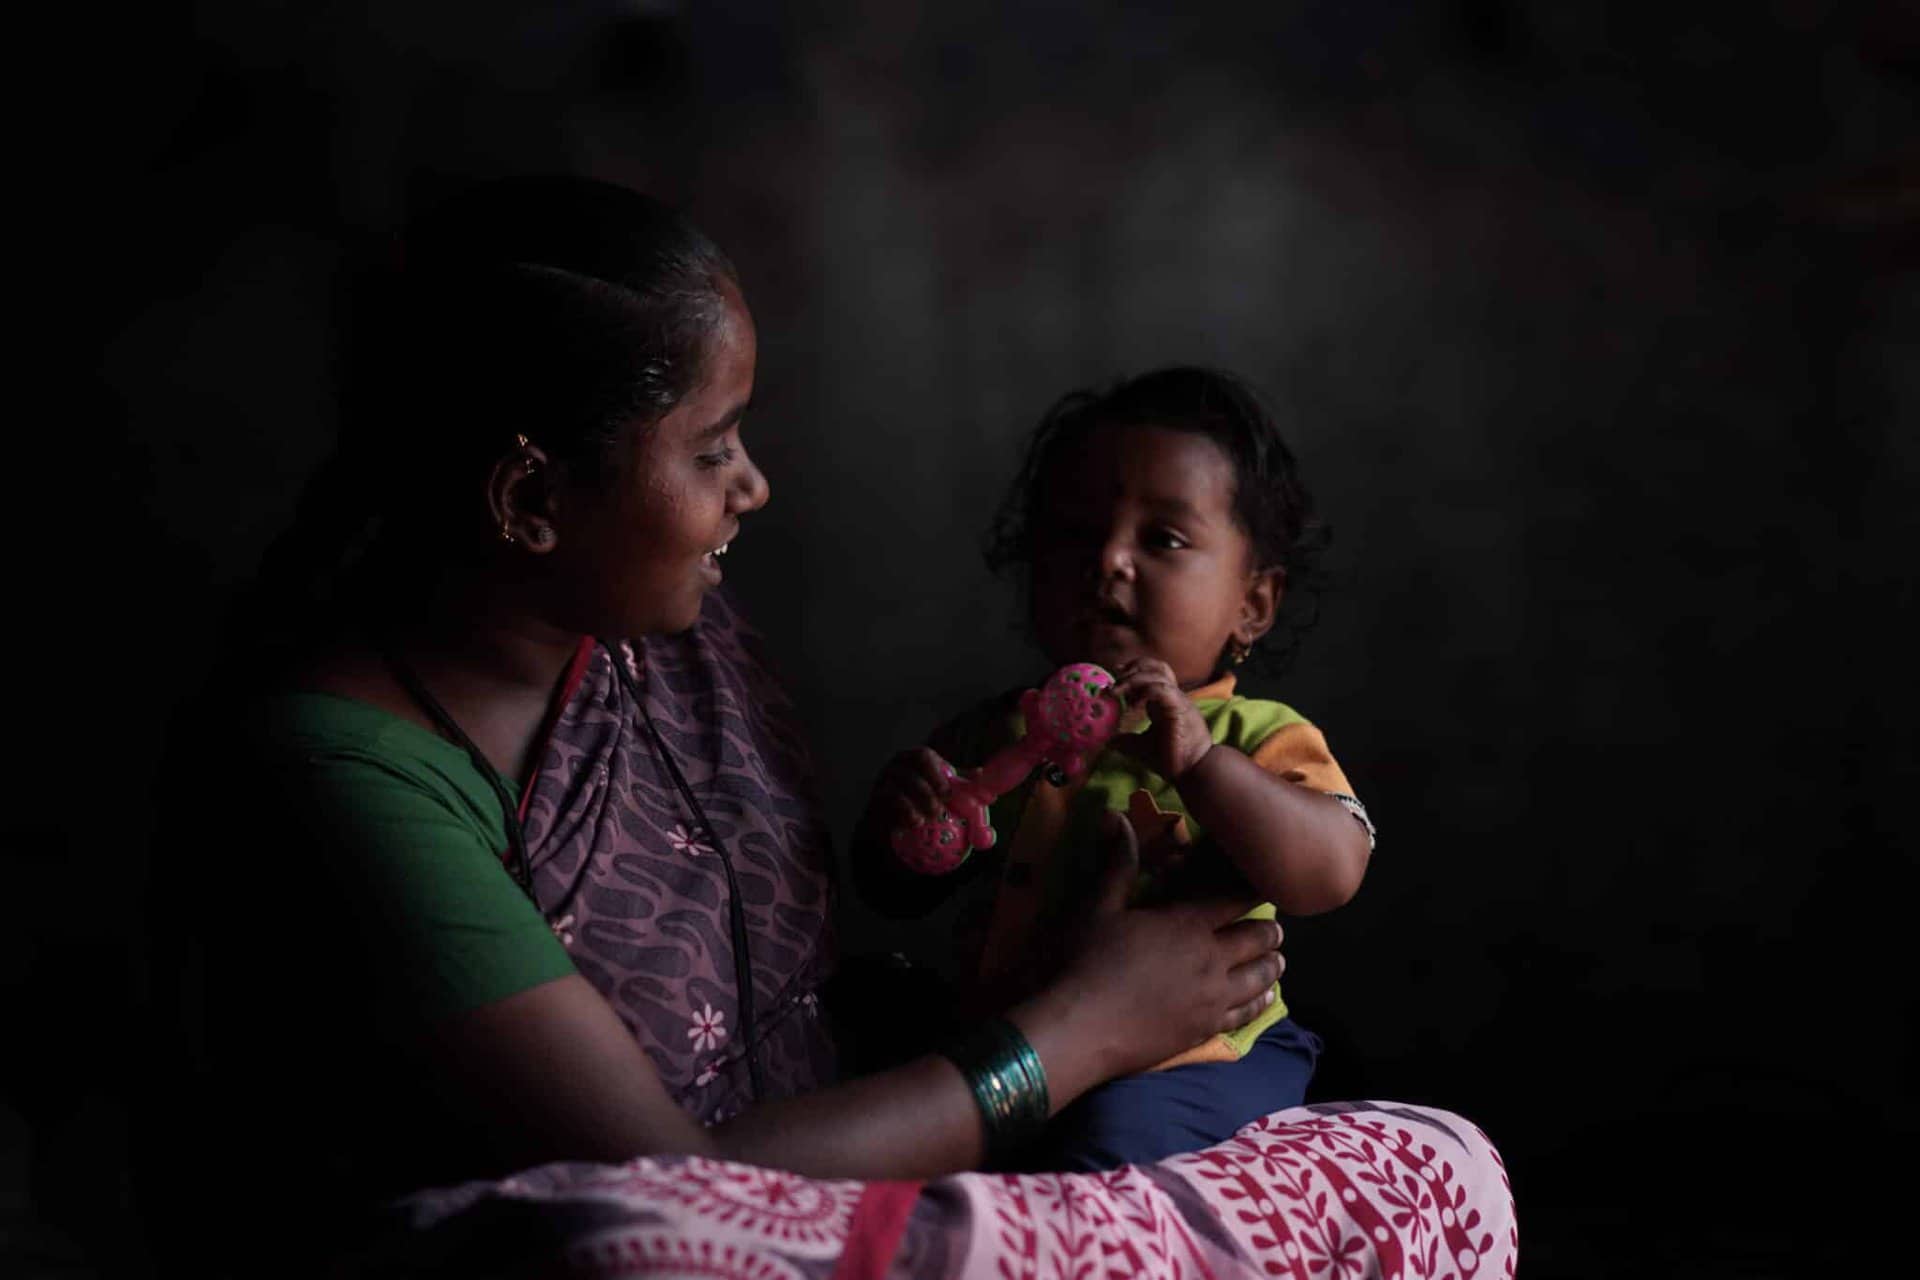 Access to health care for migrant women in India